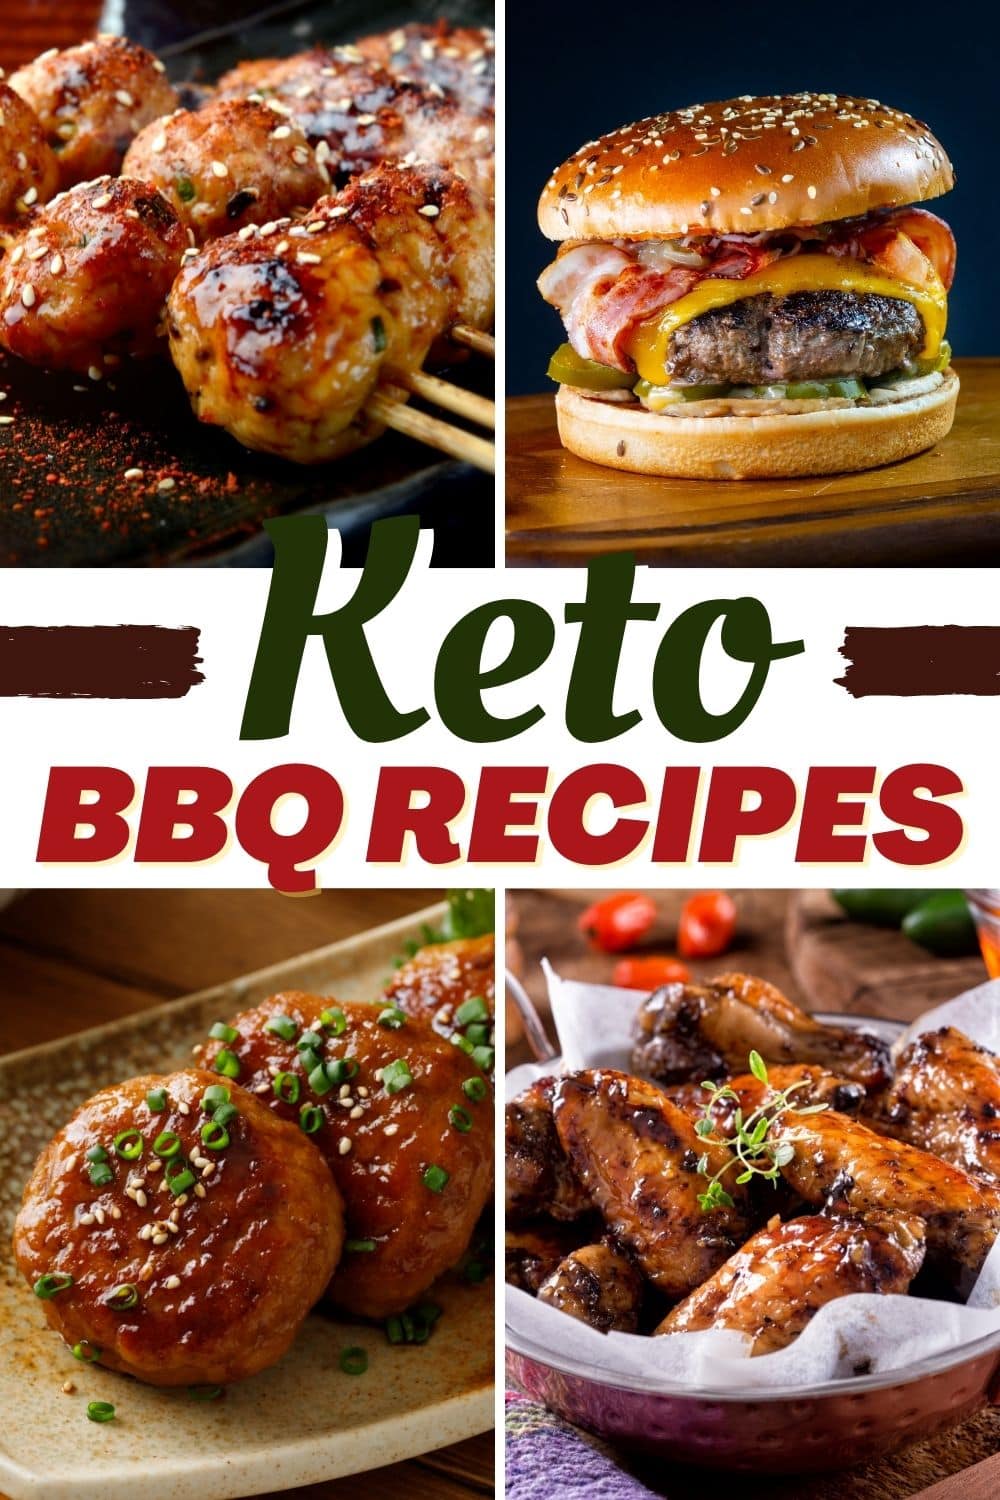 25 Keto BBQ Recipes (Best Low-Carb Grilling Ideas) - Insanely Good